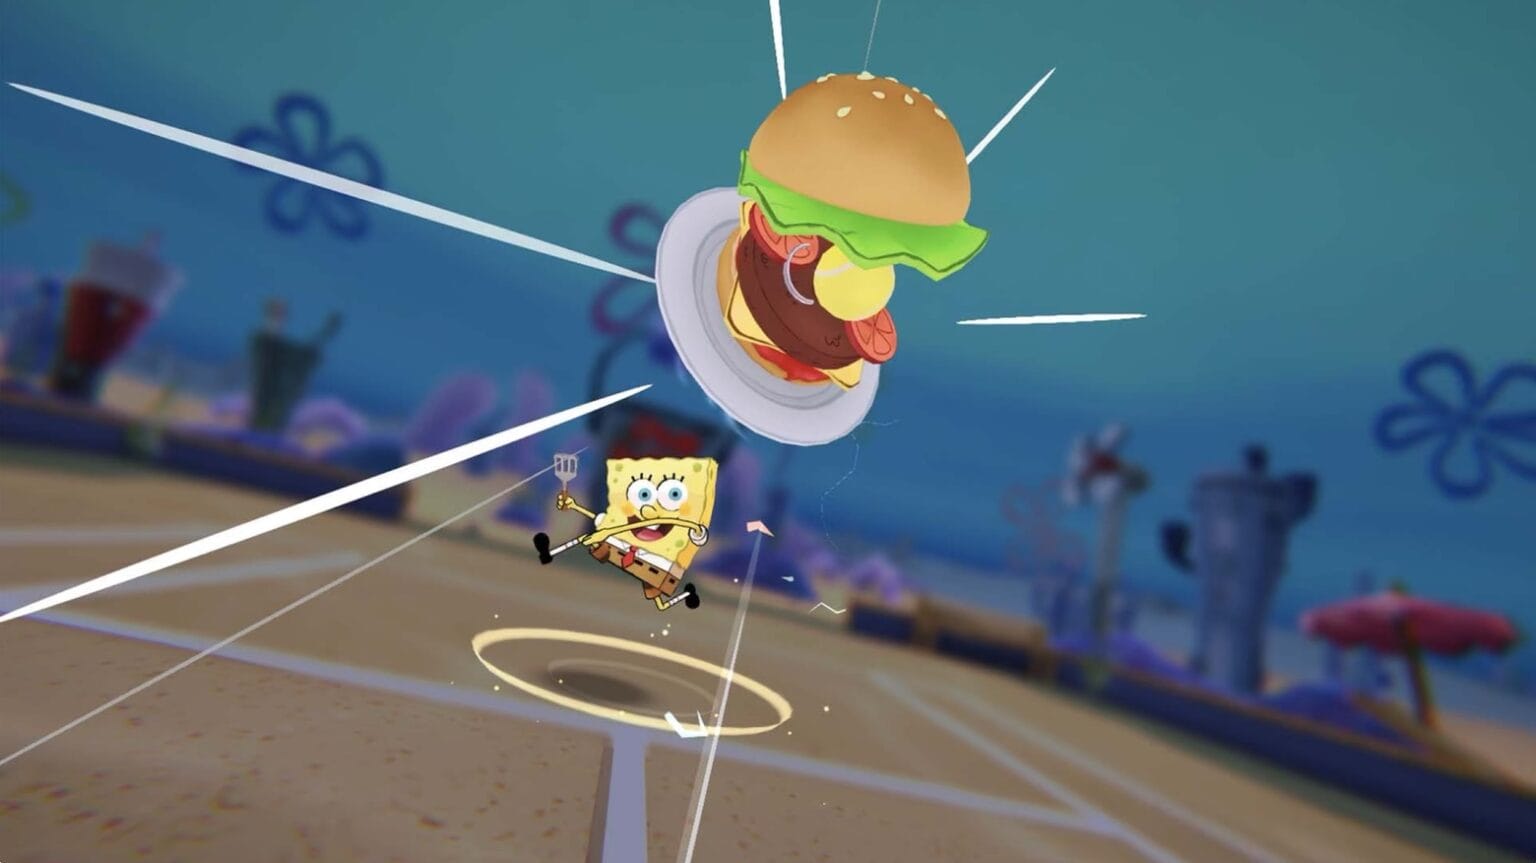 Nickelodeon characters go head-to-head in Apple Arcade’s new extreme tennis game